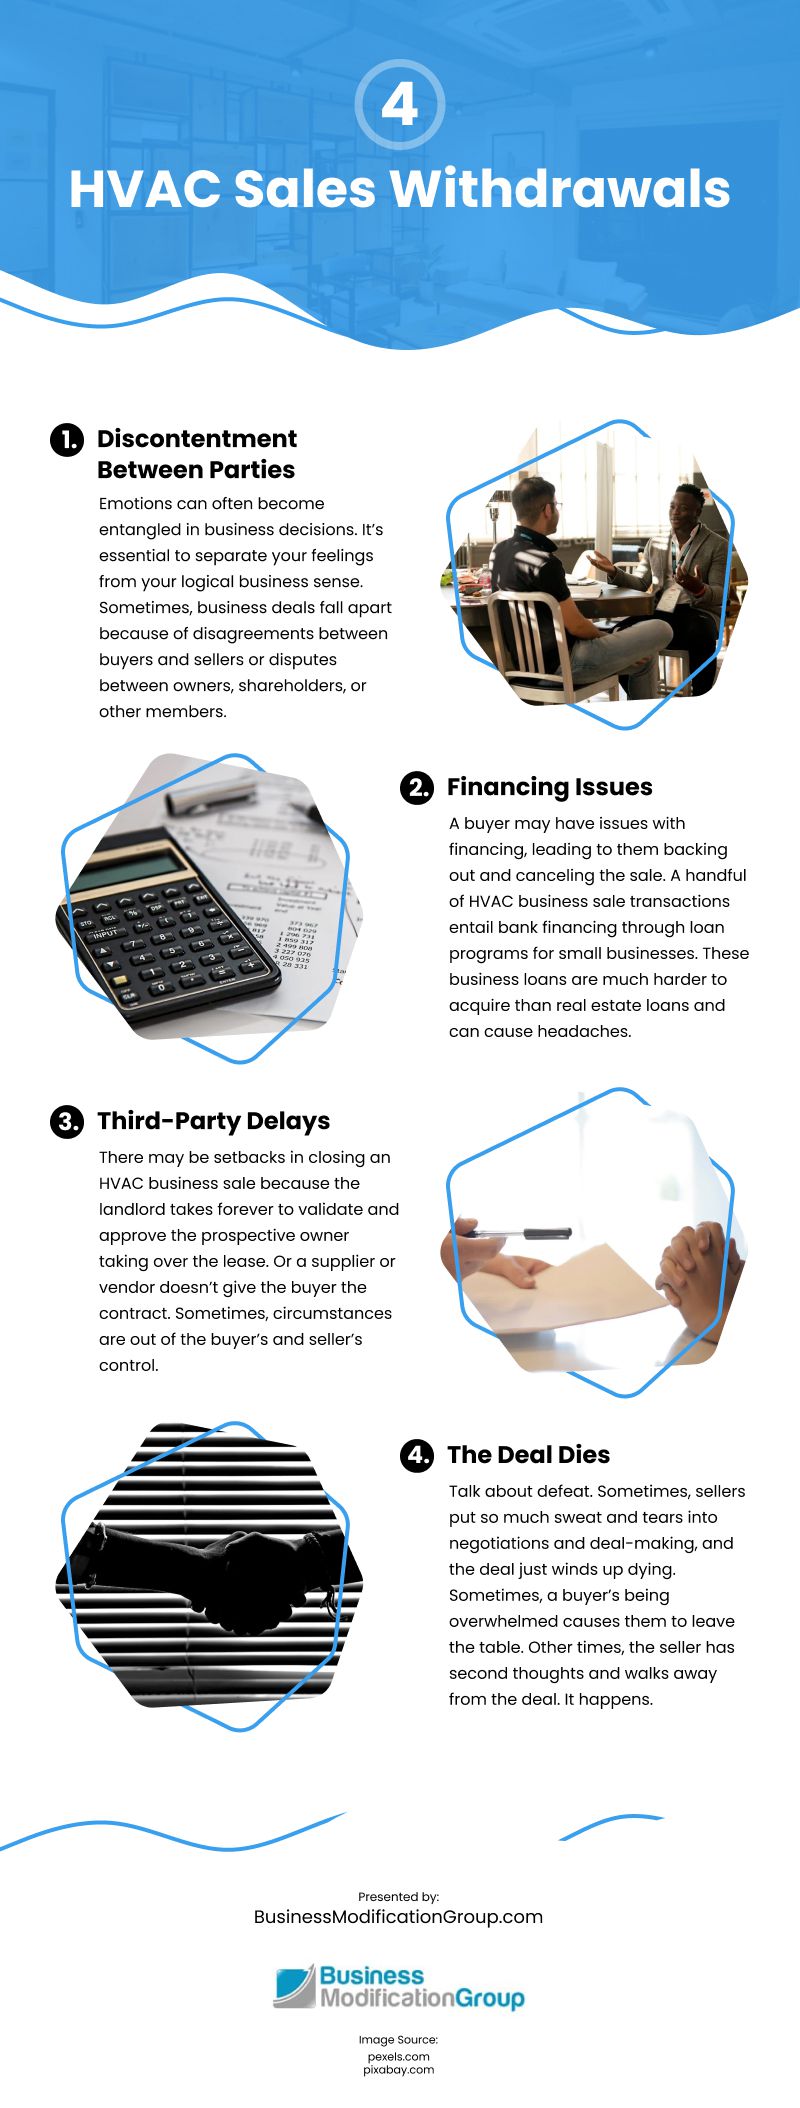 4 HVAC Sales Withdrawals Infographic